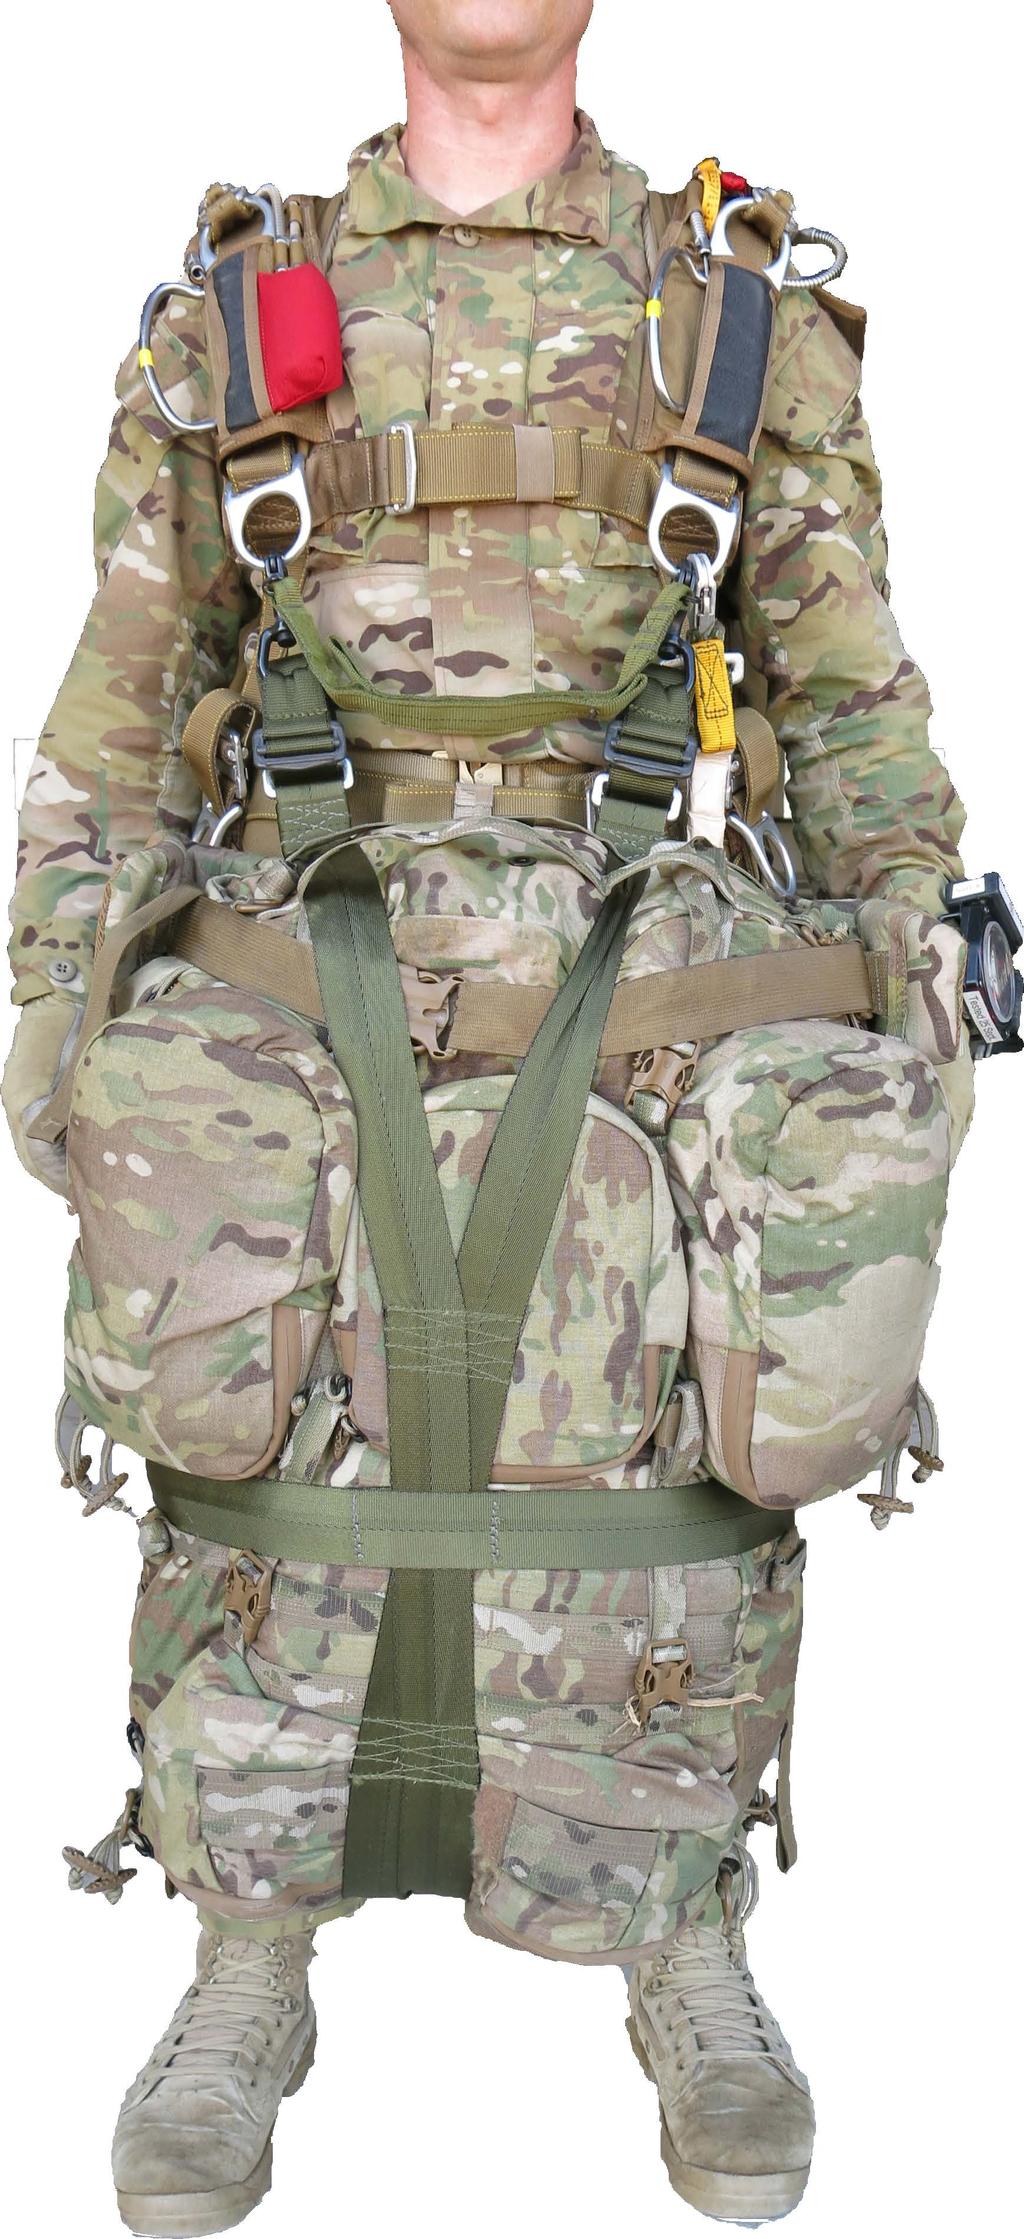 CONNECTING THE PACK TO THE PARACHUTE HARNESS The parachutist stands facing the rigged combat pack and steps through the pack shoulder straps.